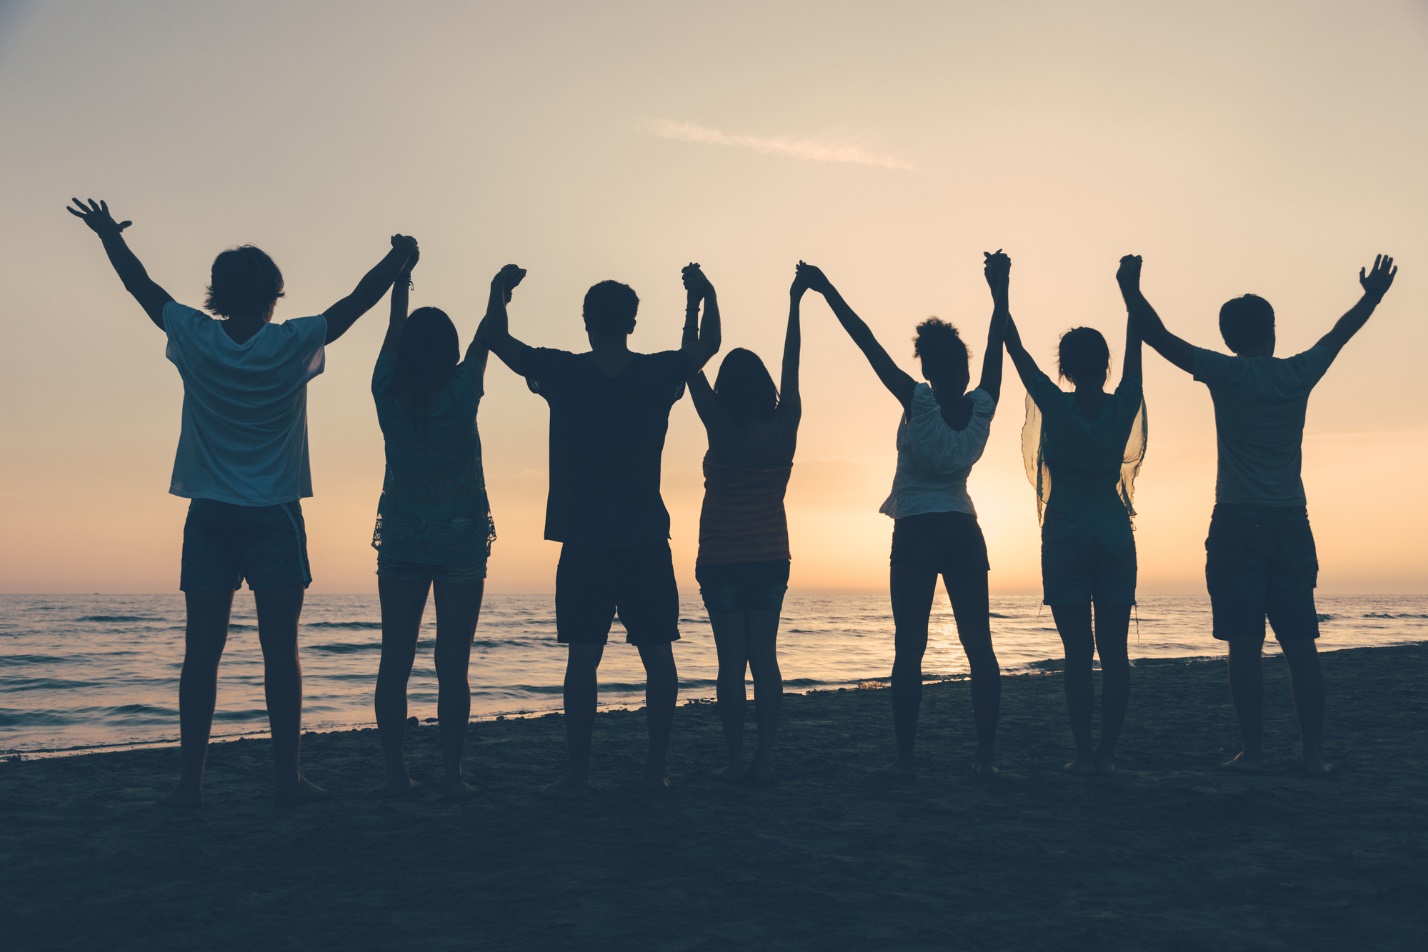 A group of people holding hands on a beach

Description automatically generated